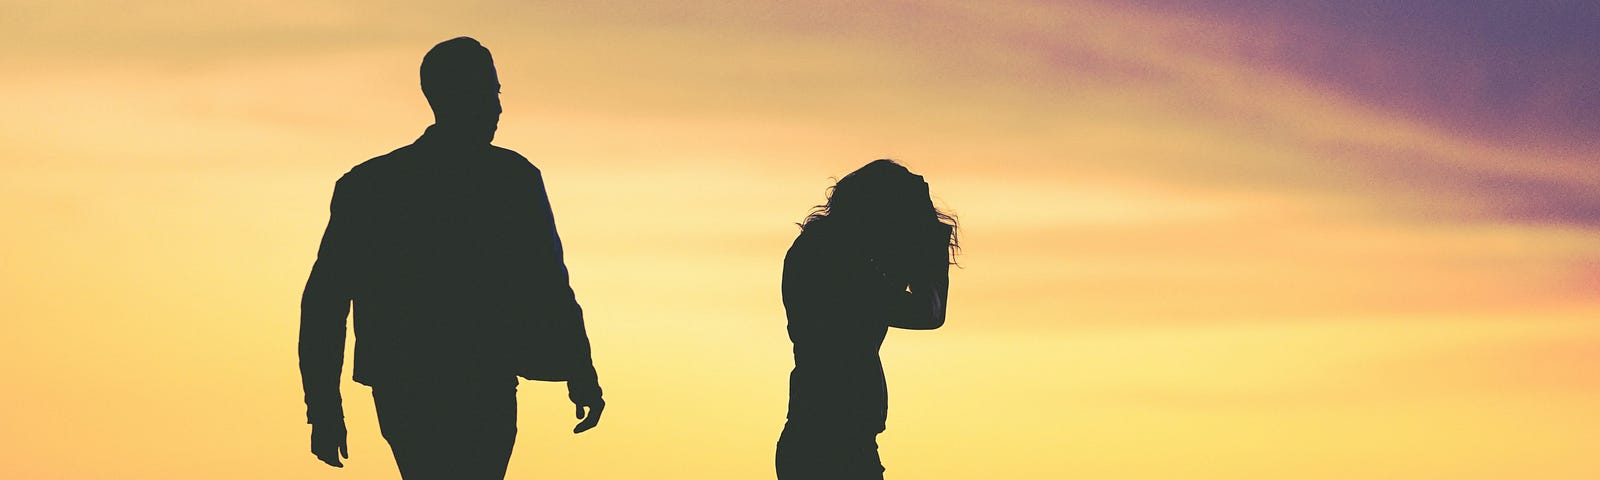 silhouette of couple on the beach, arguing